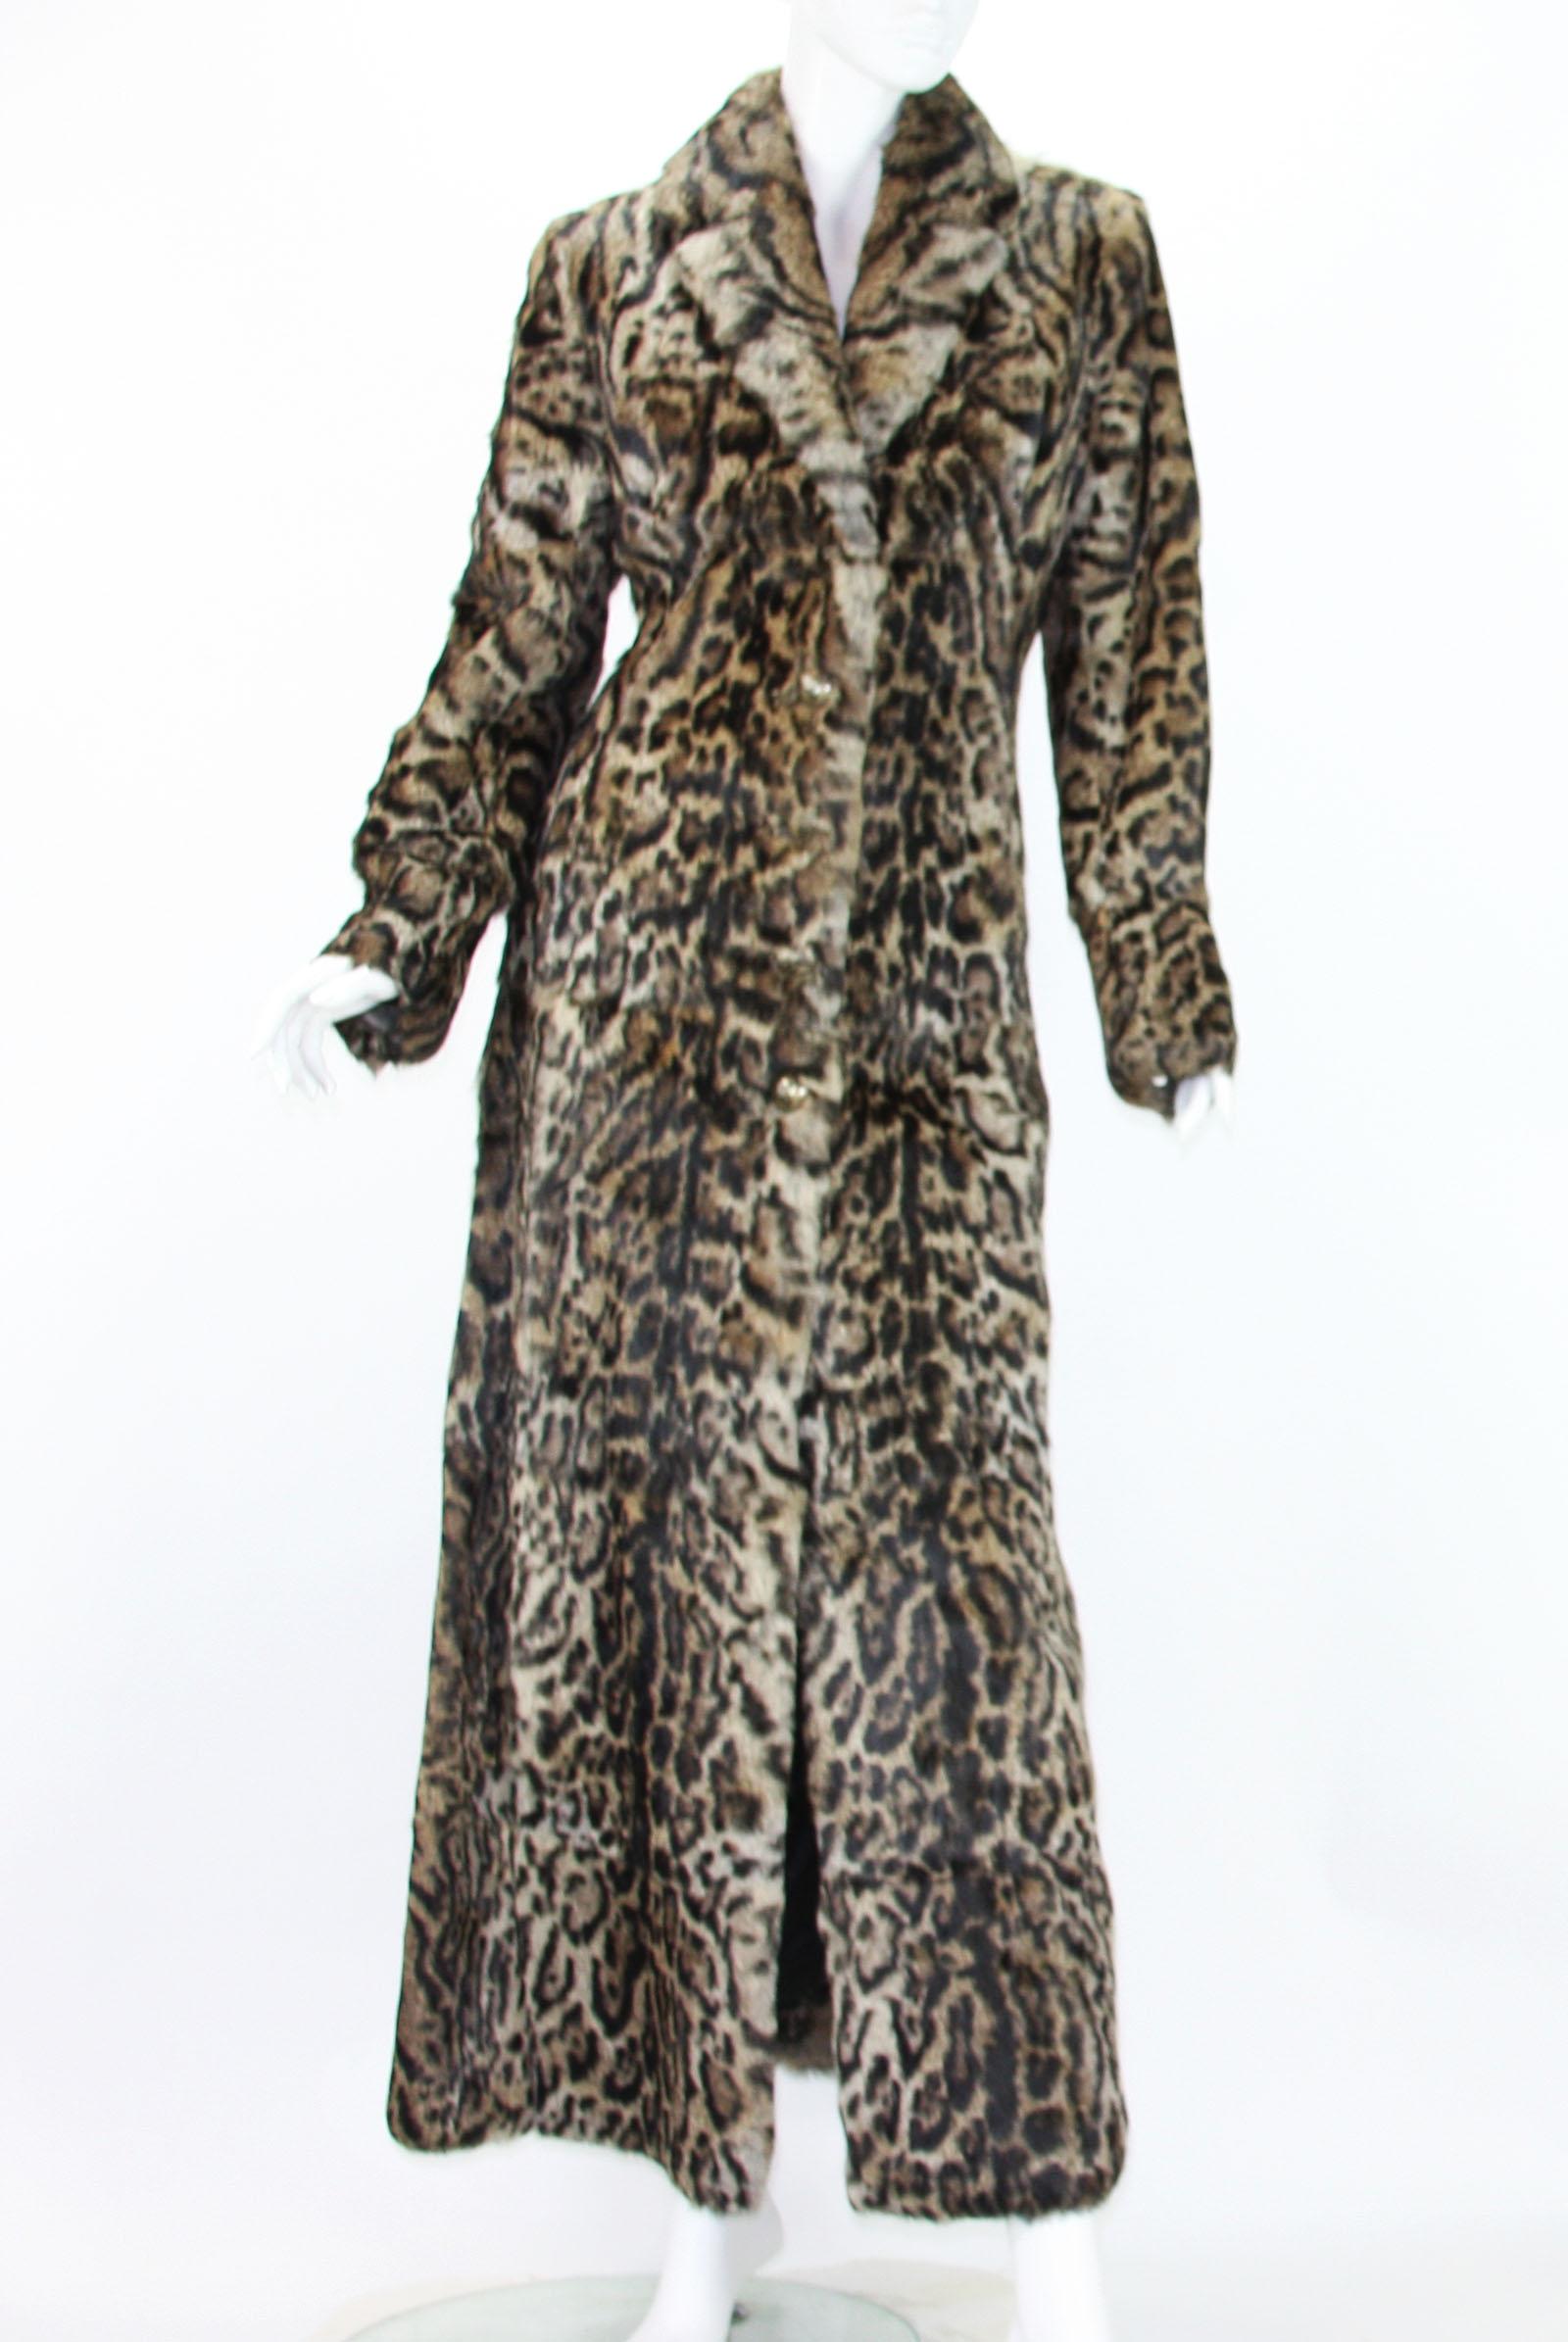 New Roberto Cavalli Runway Fur Long Leopard Print Coat
F/W 2016 Collection
Designer size 42 - US 6
100% Real Fur, A-line Style, Famous Cavalli Leopard Print, Slit Side Pockets, 
Metal Logo Buttons Closure, High Back Slit, Fully Lined in Silk, 4